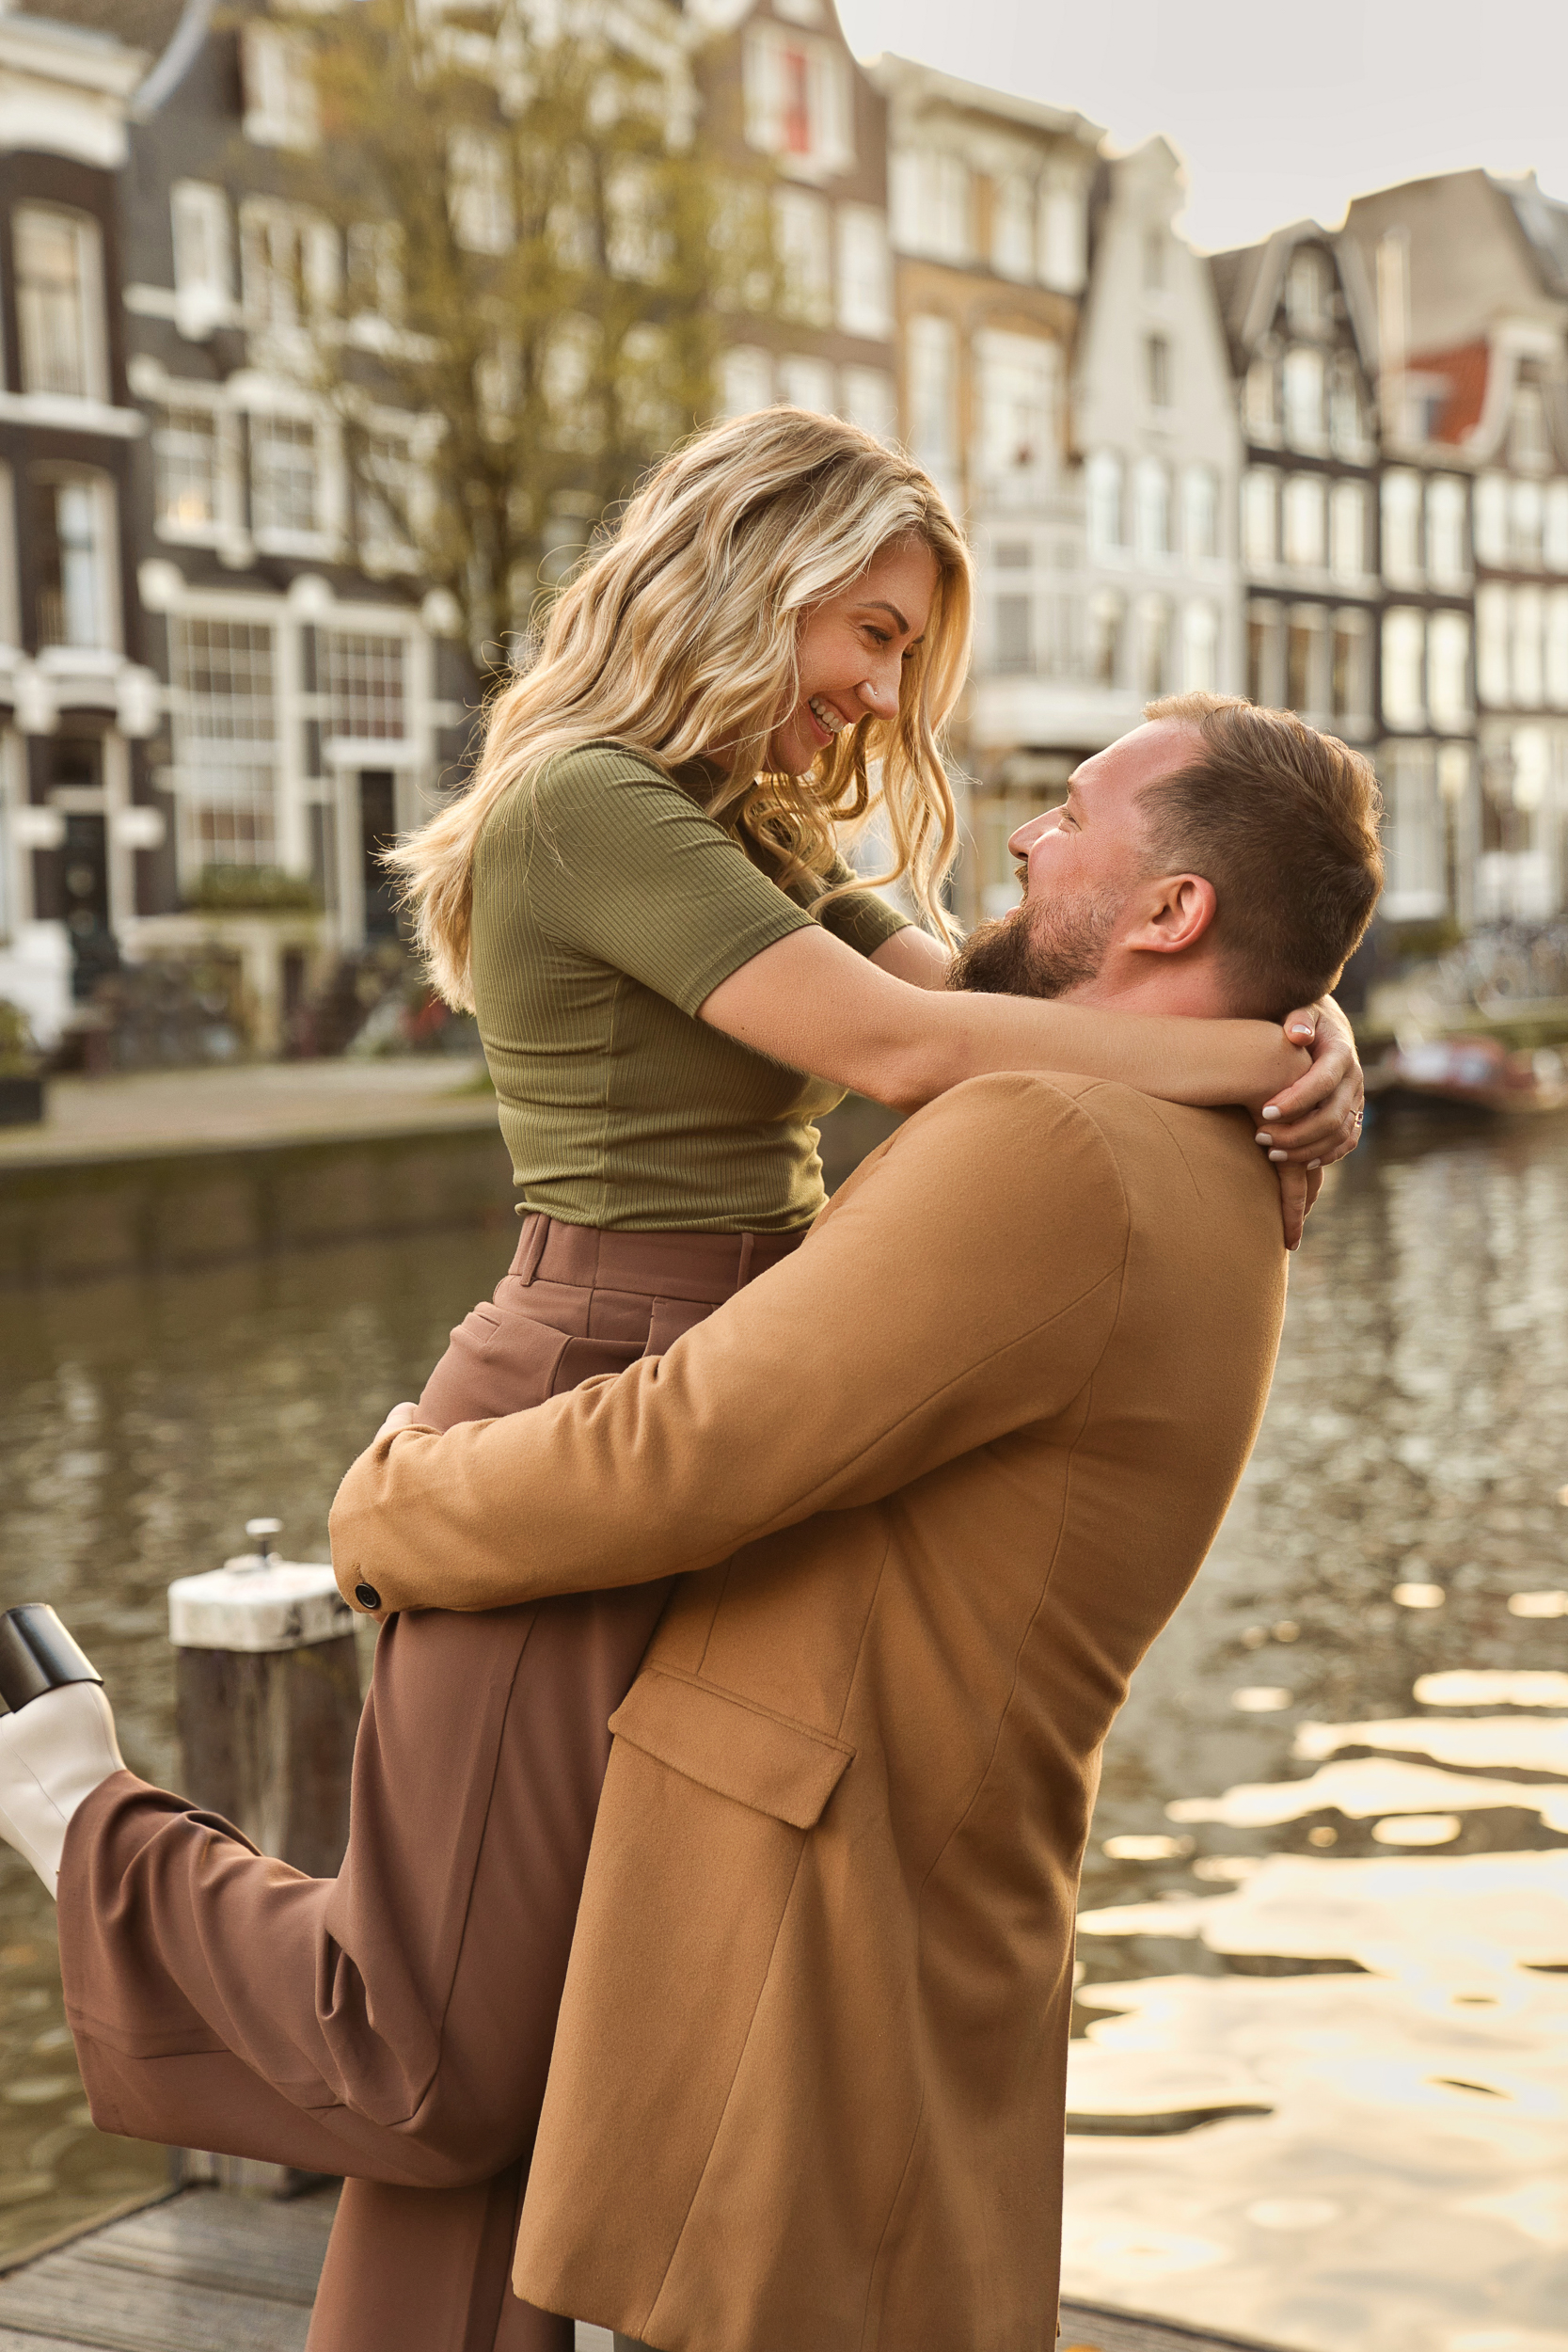 A man is smiling and holding up his newly fiancée in Amsterdam's canals.